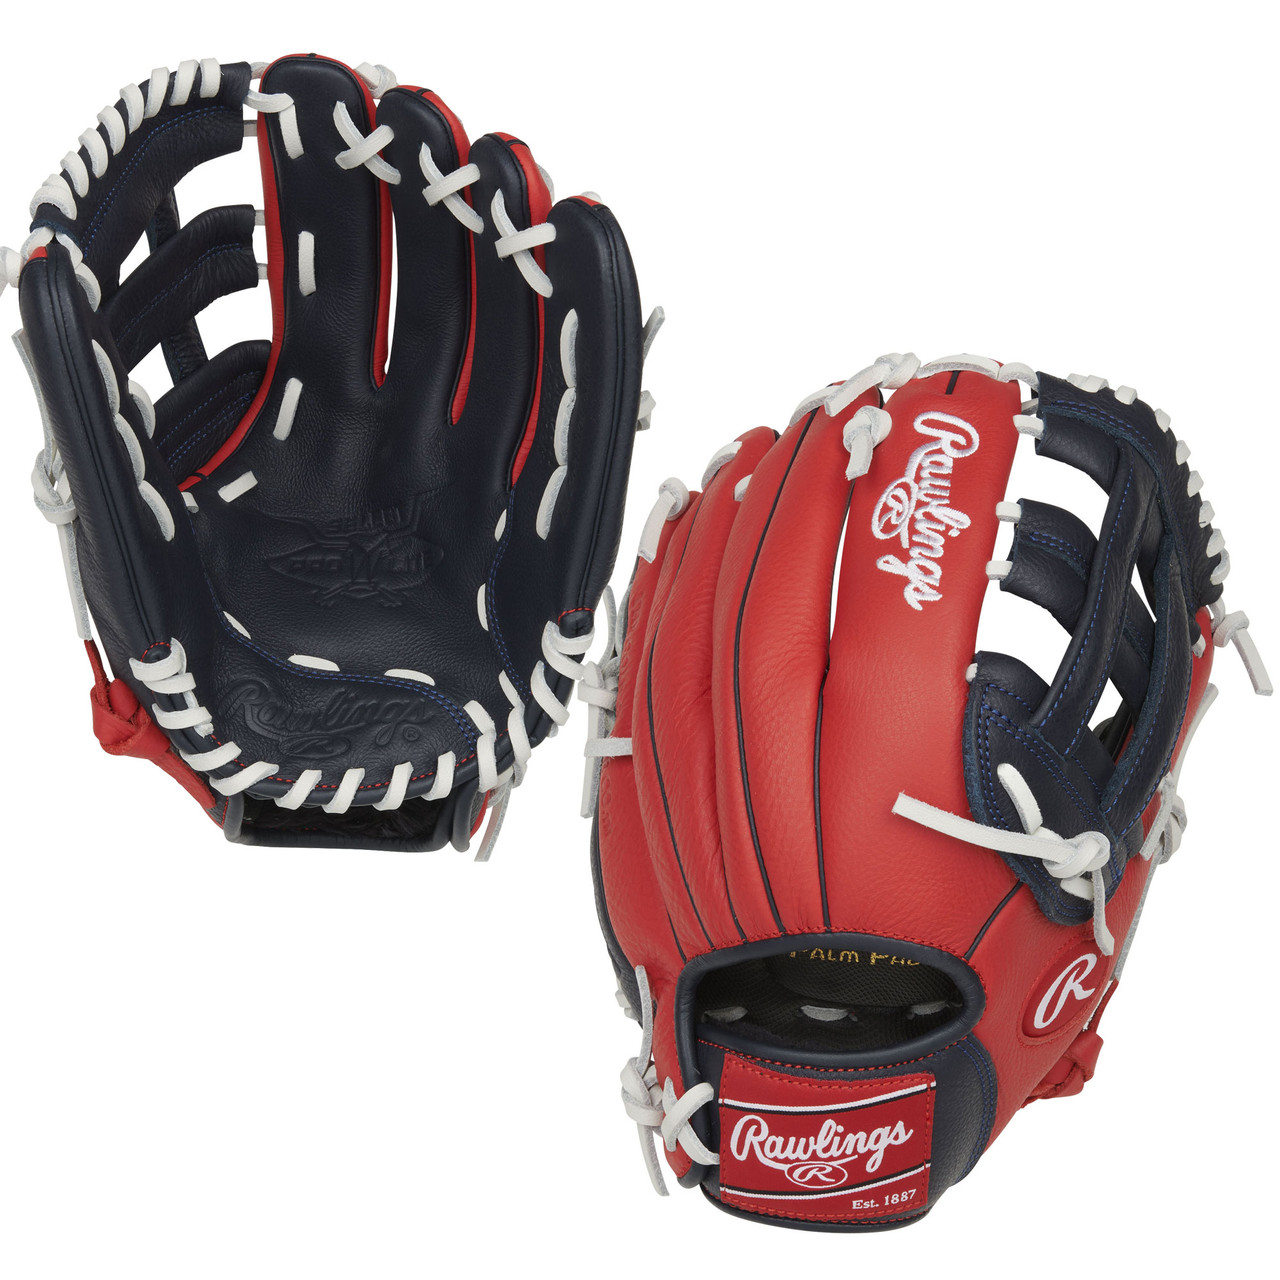 New RAWLINGS SELECT PRO LITE 11.5 FRANCISCO LINDOR YOUTH GLOVE